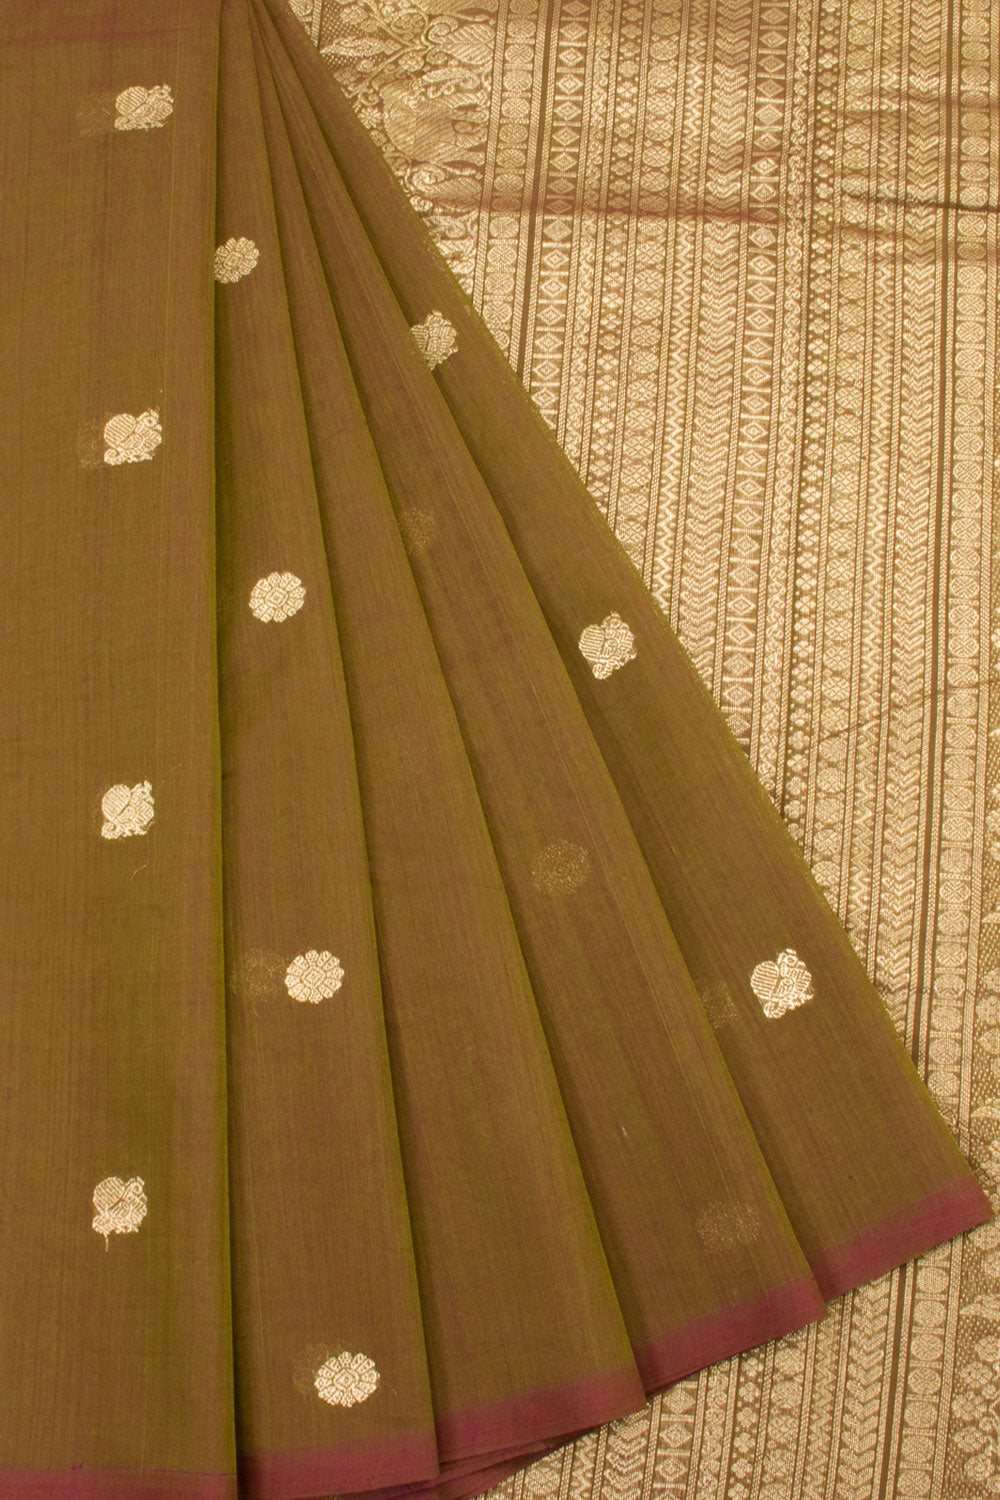 Handwoven Kanchi Cotton Saree With Peacock and Floral Motifs